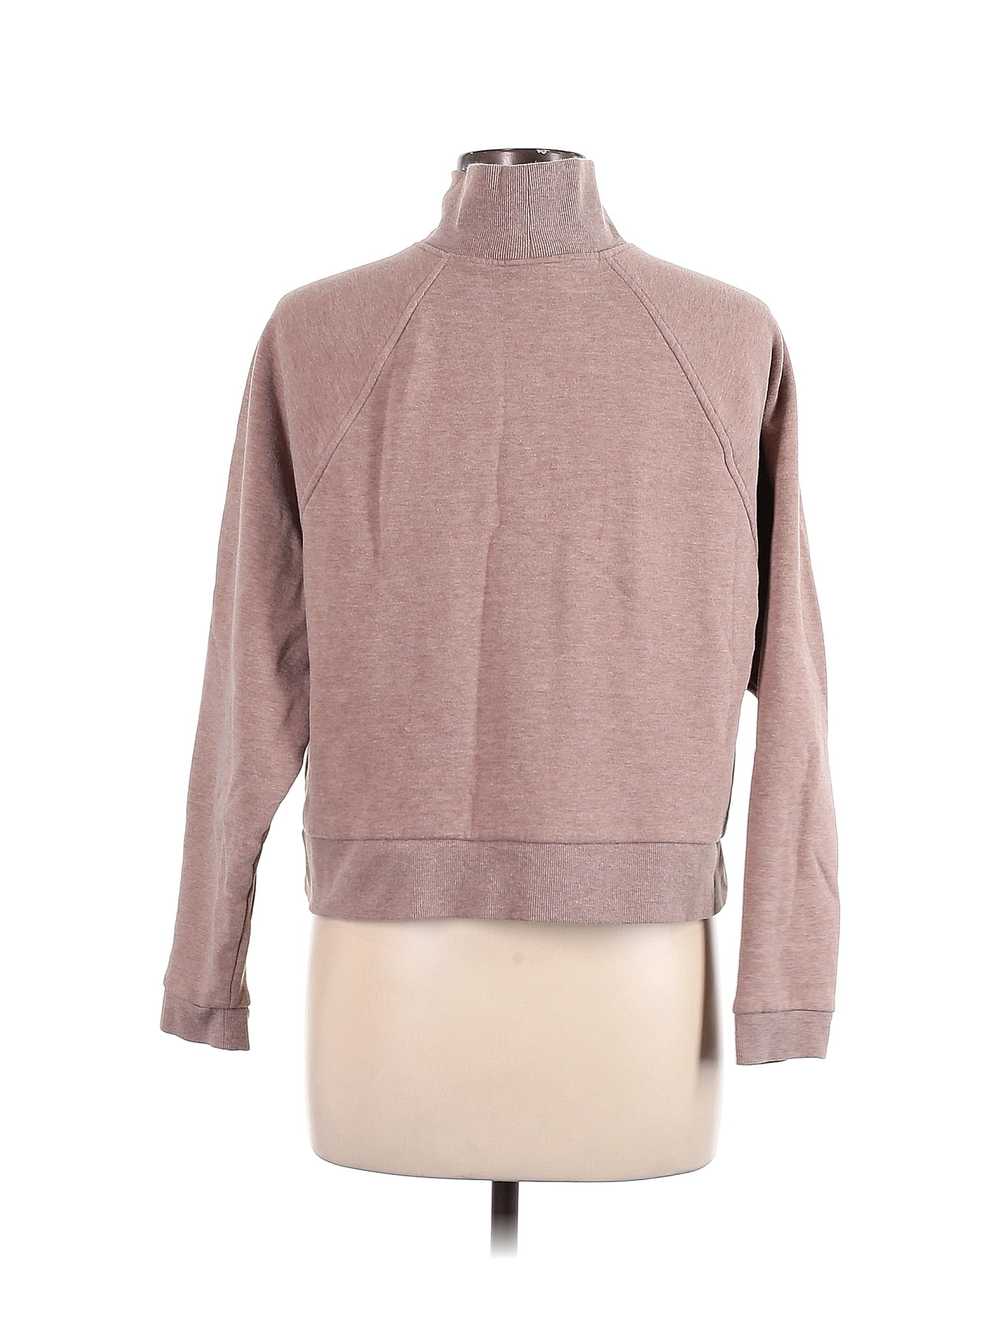 A New Day Women Brown Turtleneck Sweater L - image 2